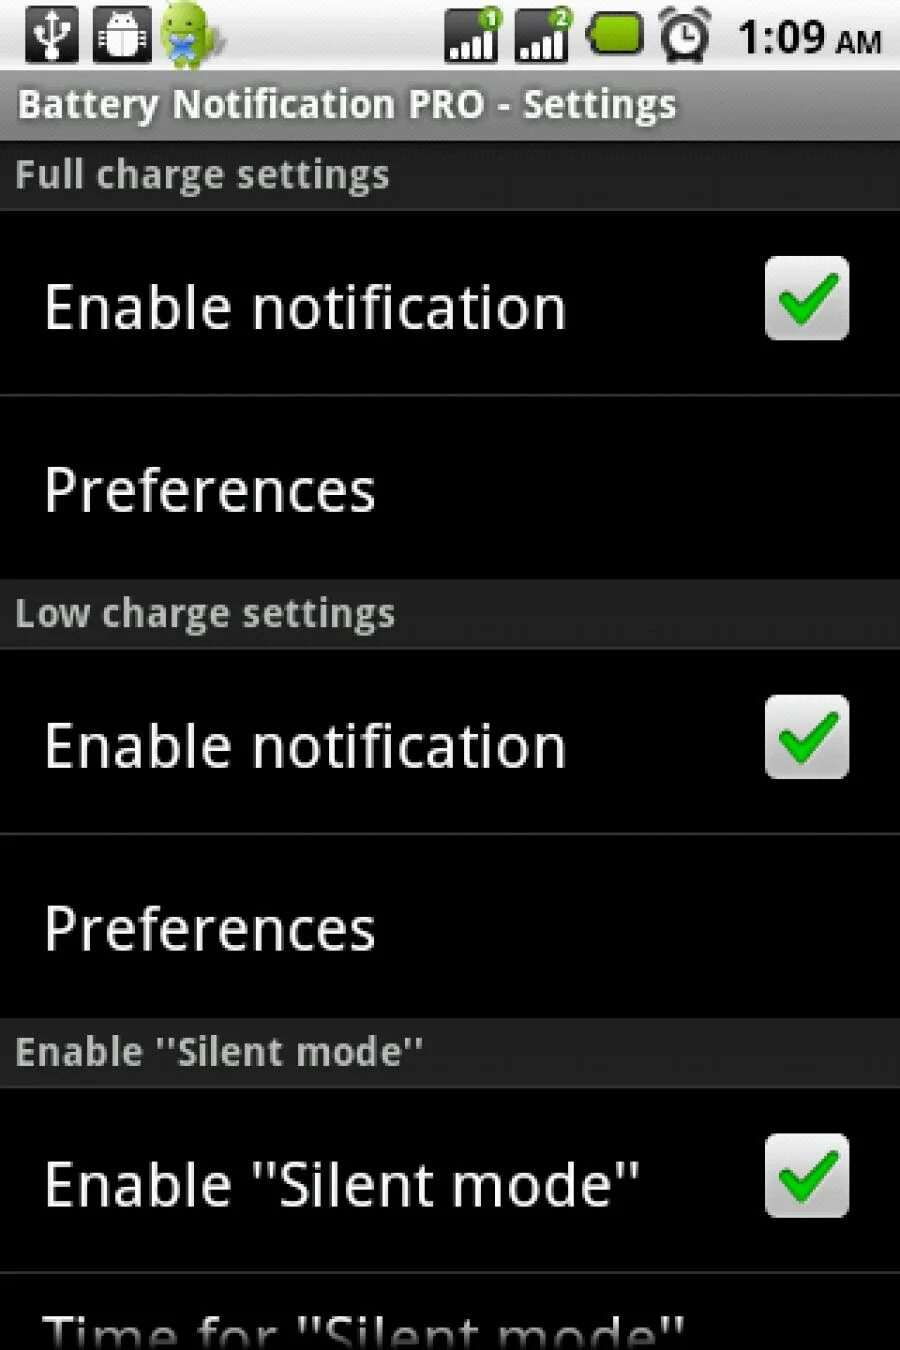 Pro battery apk. Battery Notification APK.. Battery Notification Push. Battery Mode. Battery Low Charging Samsung Android 4.4.